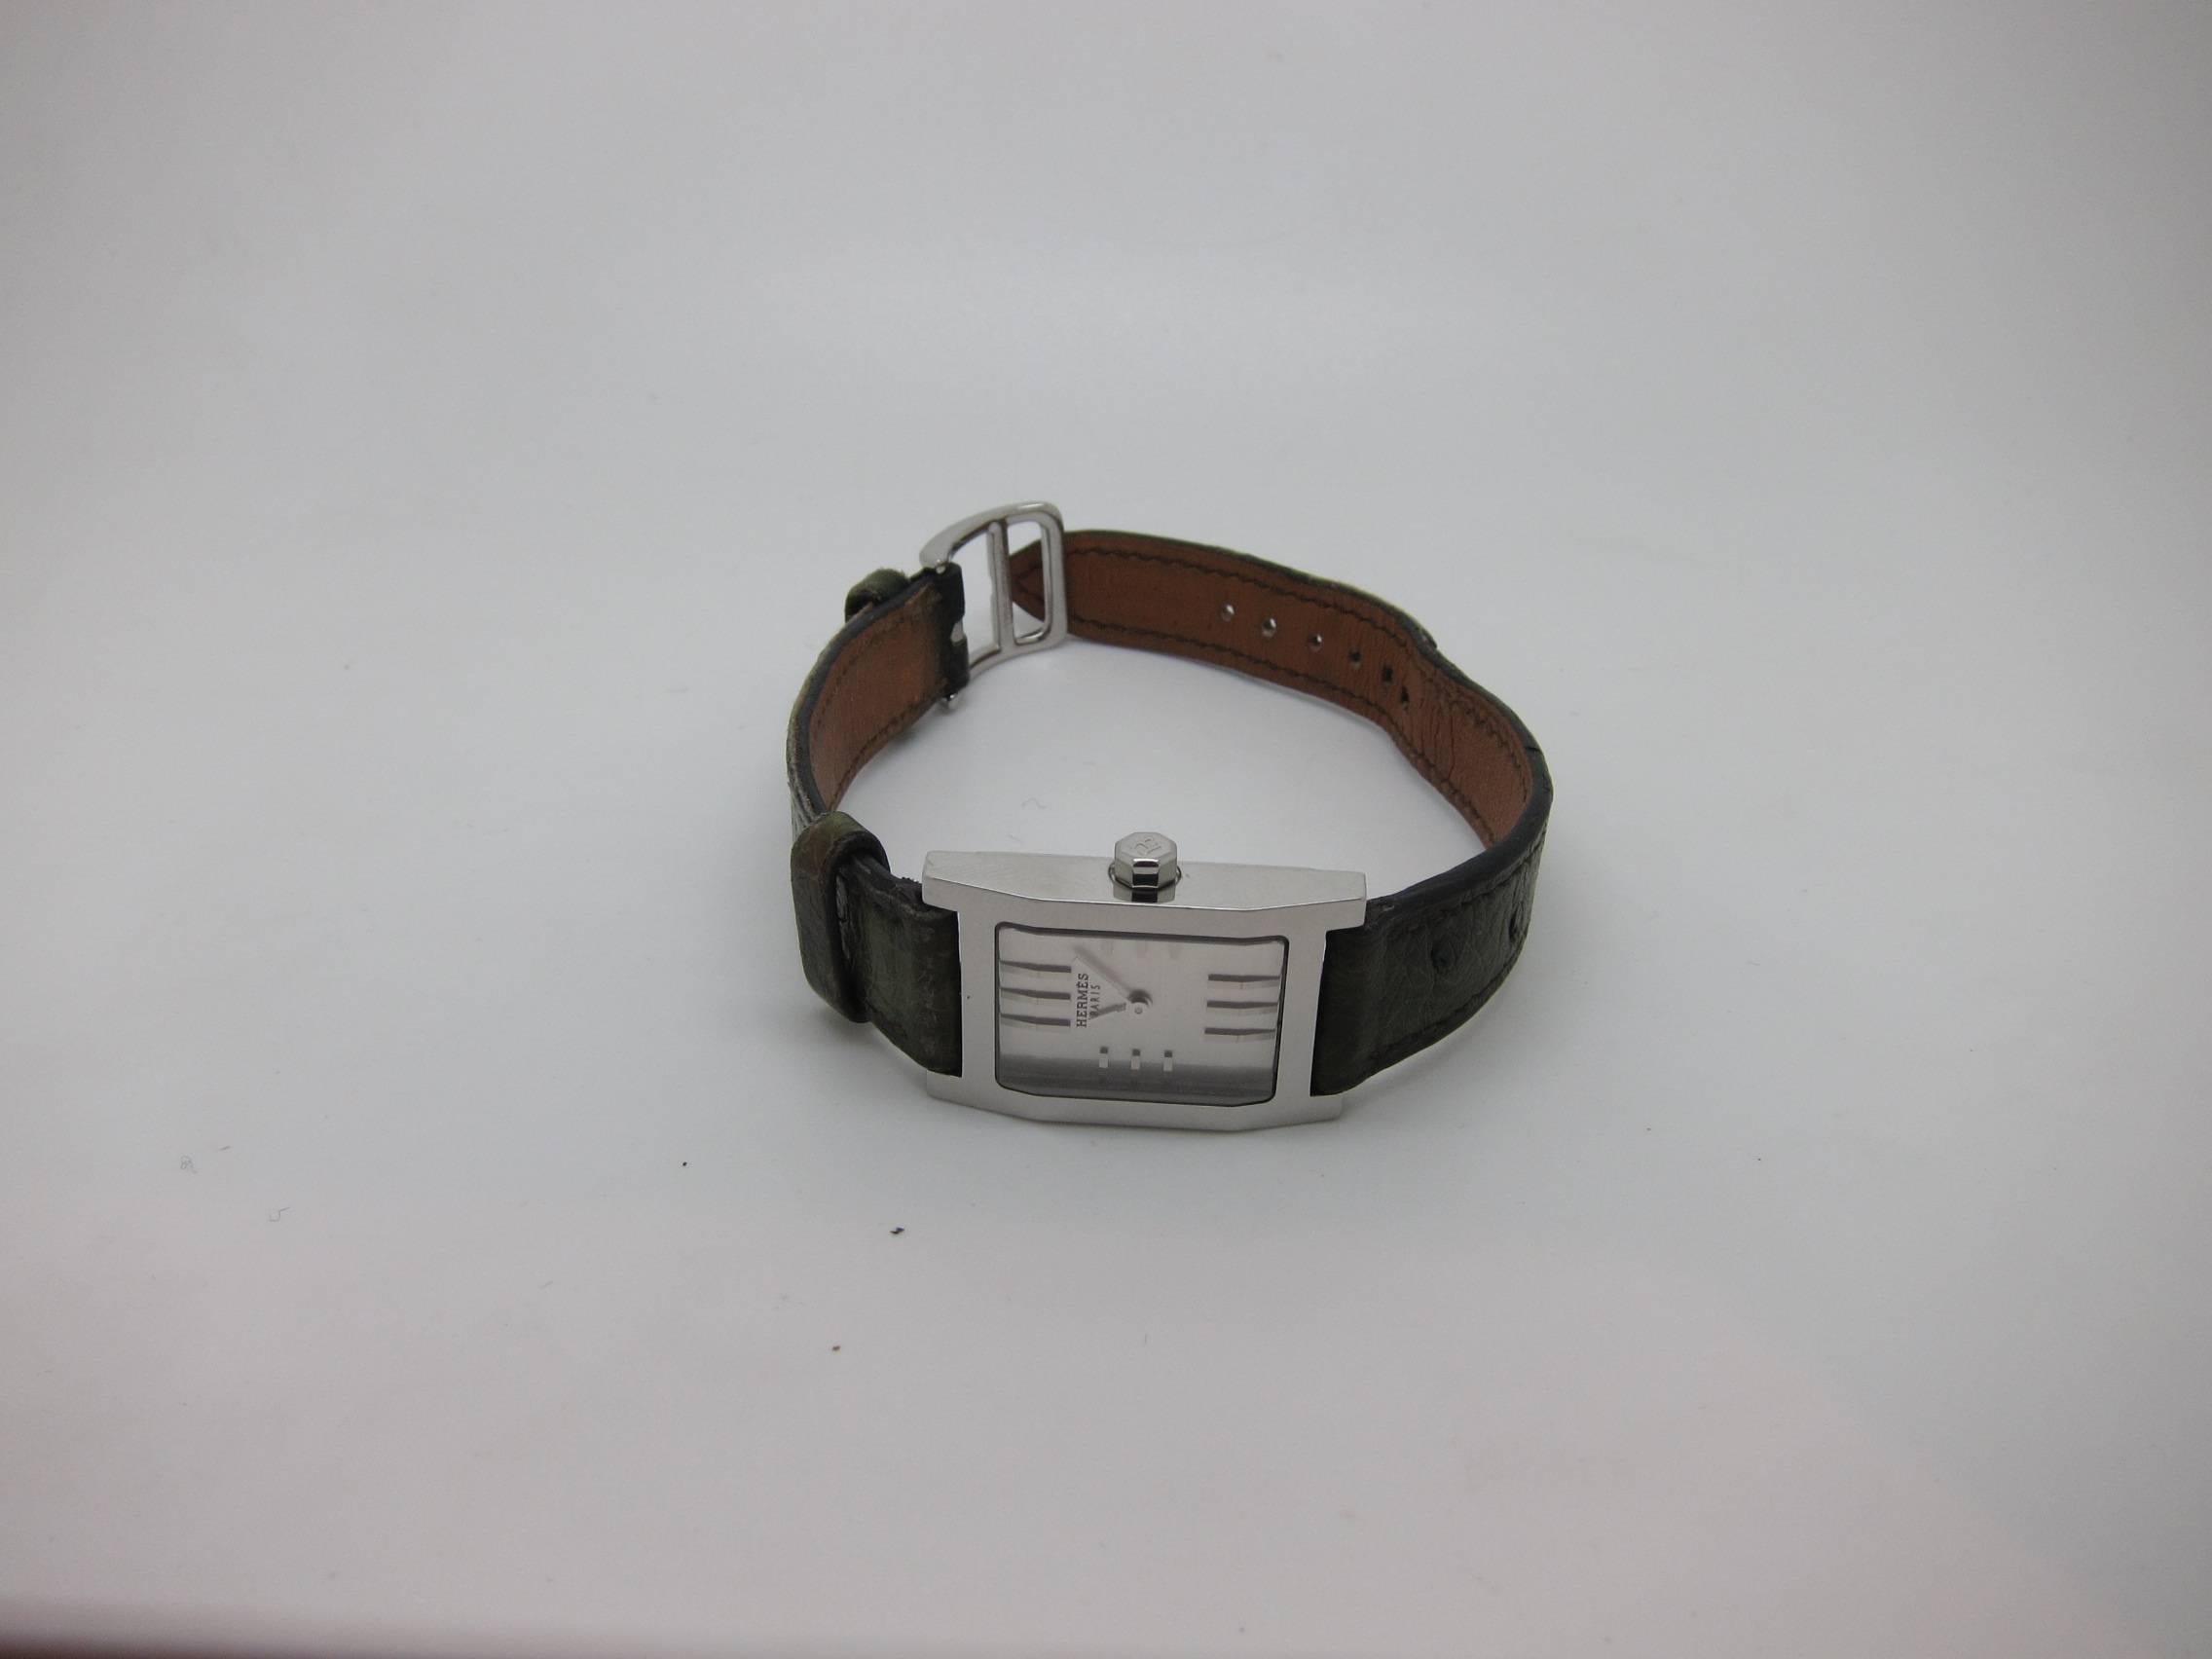 Nice Hermes tandem watch with Hermes leather Band. 

Good condition but some signs of wear.

This model is no longer available in the shops.